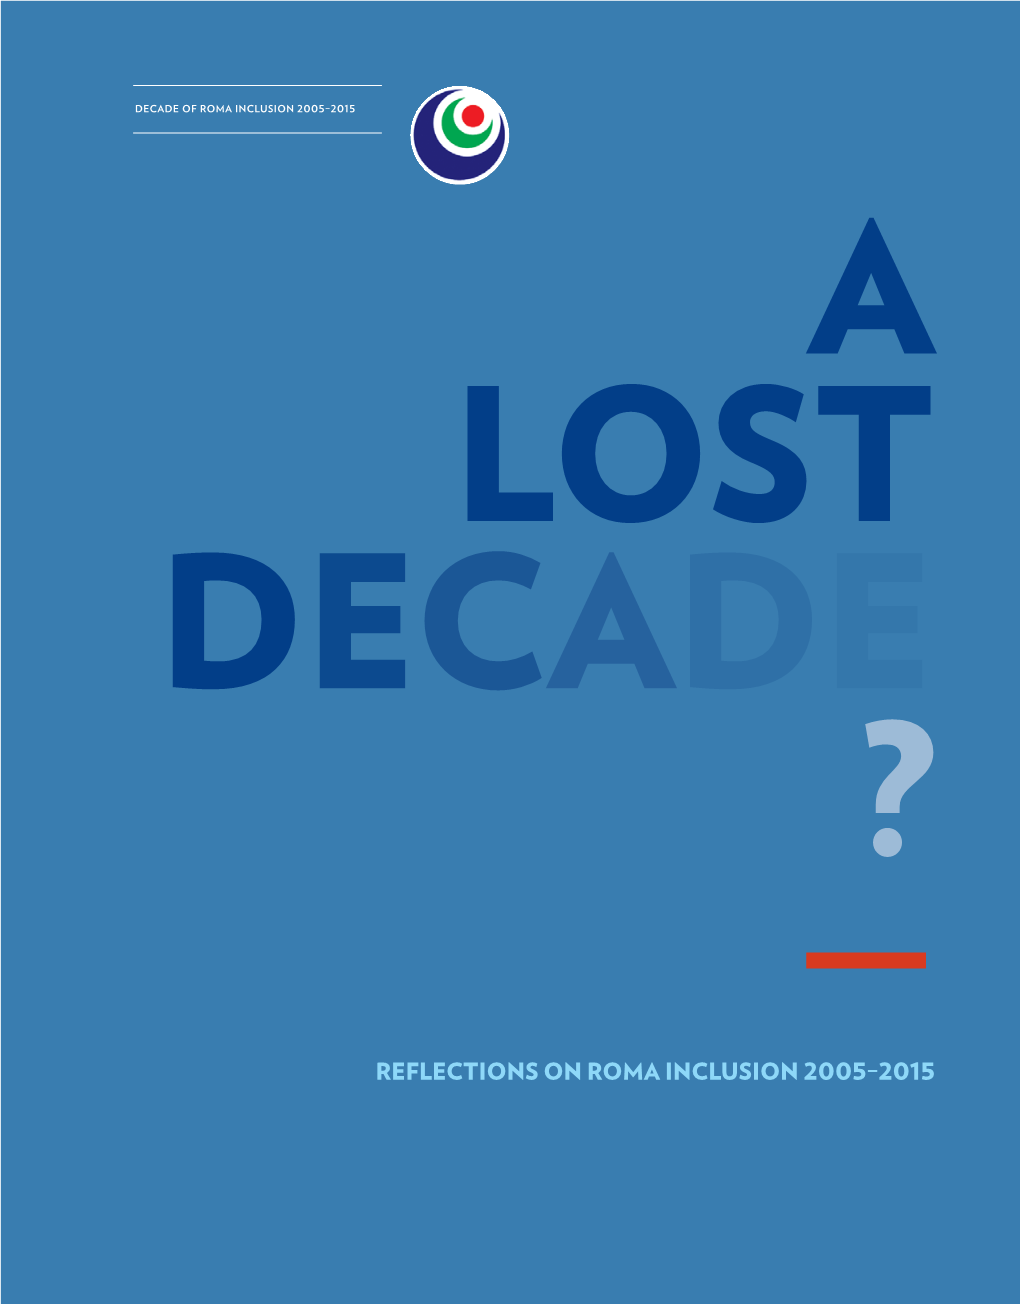 A Lost Decade? Ten Years On, This Publication Aims to Take Stock and Reflect on the Vicissitudes of Roma Inclusion Since 2005